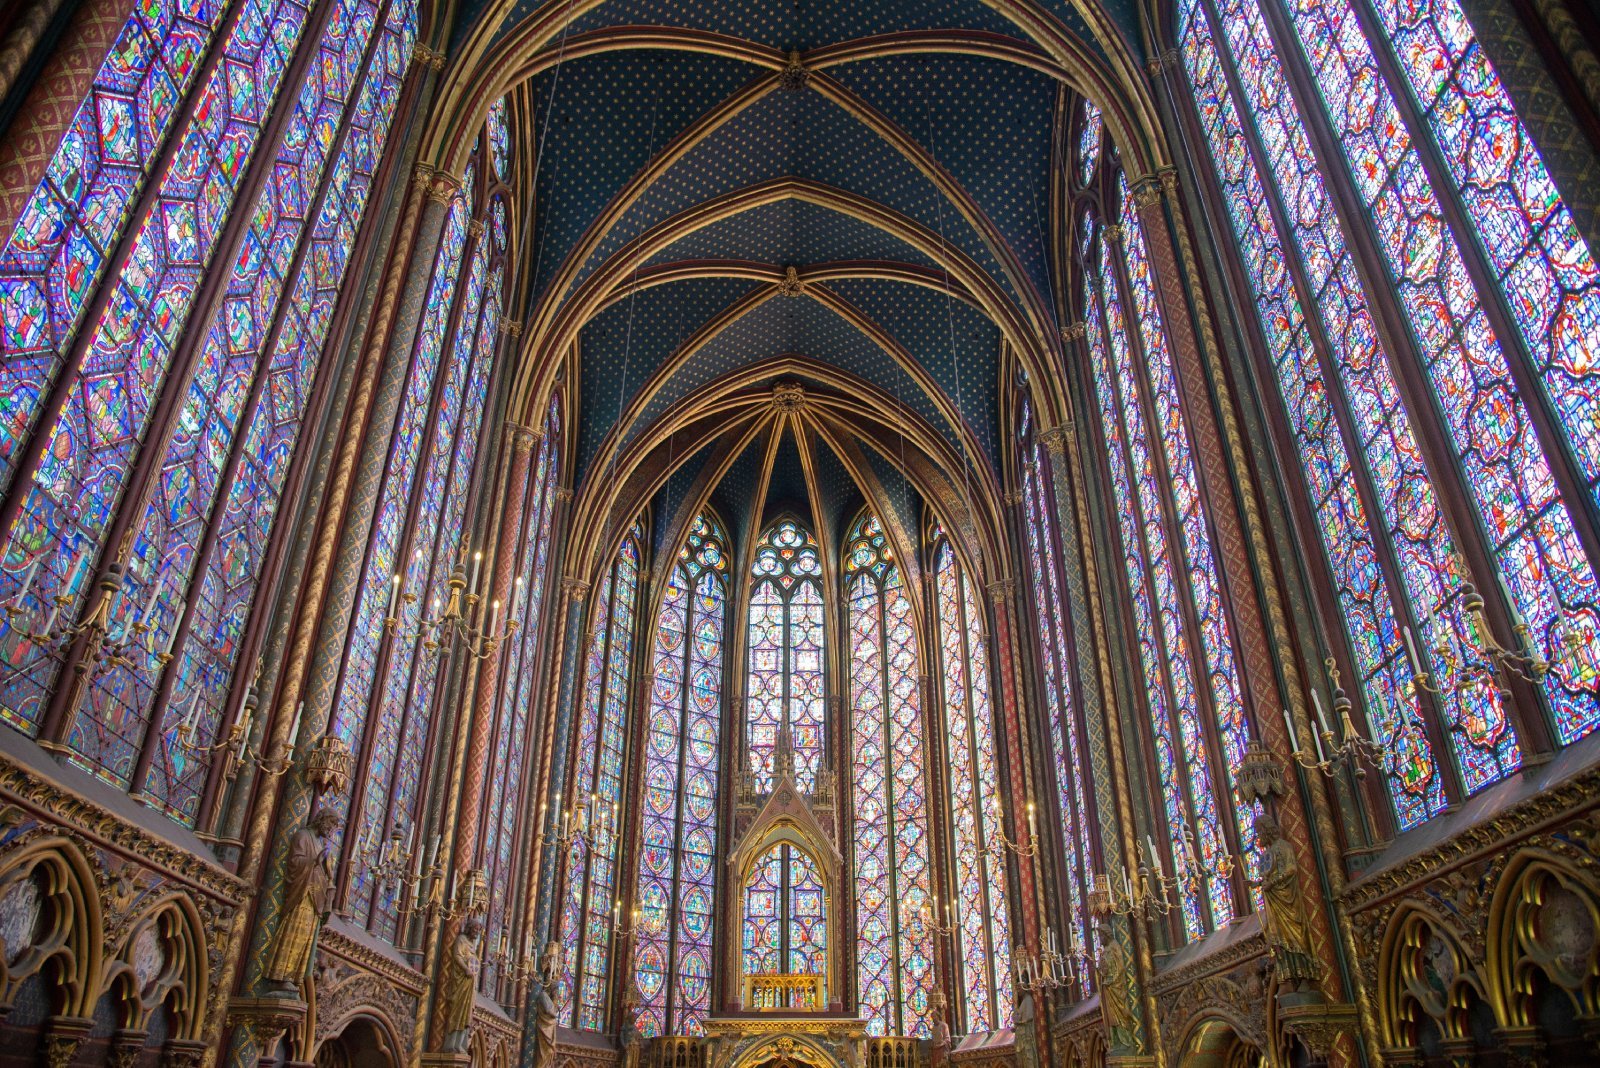 Image Credit: Shutterstock / juan hung-yen <p>Within Sainte-Chapelle, biblical stories unfold in a dazzling display of colour and light cast by the chapel’s magnificent stained-glass windows.</p>